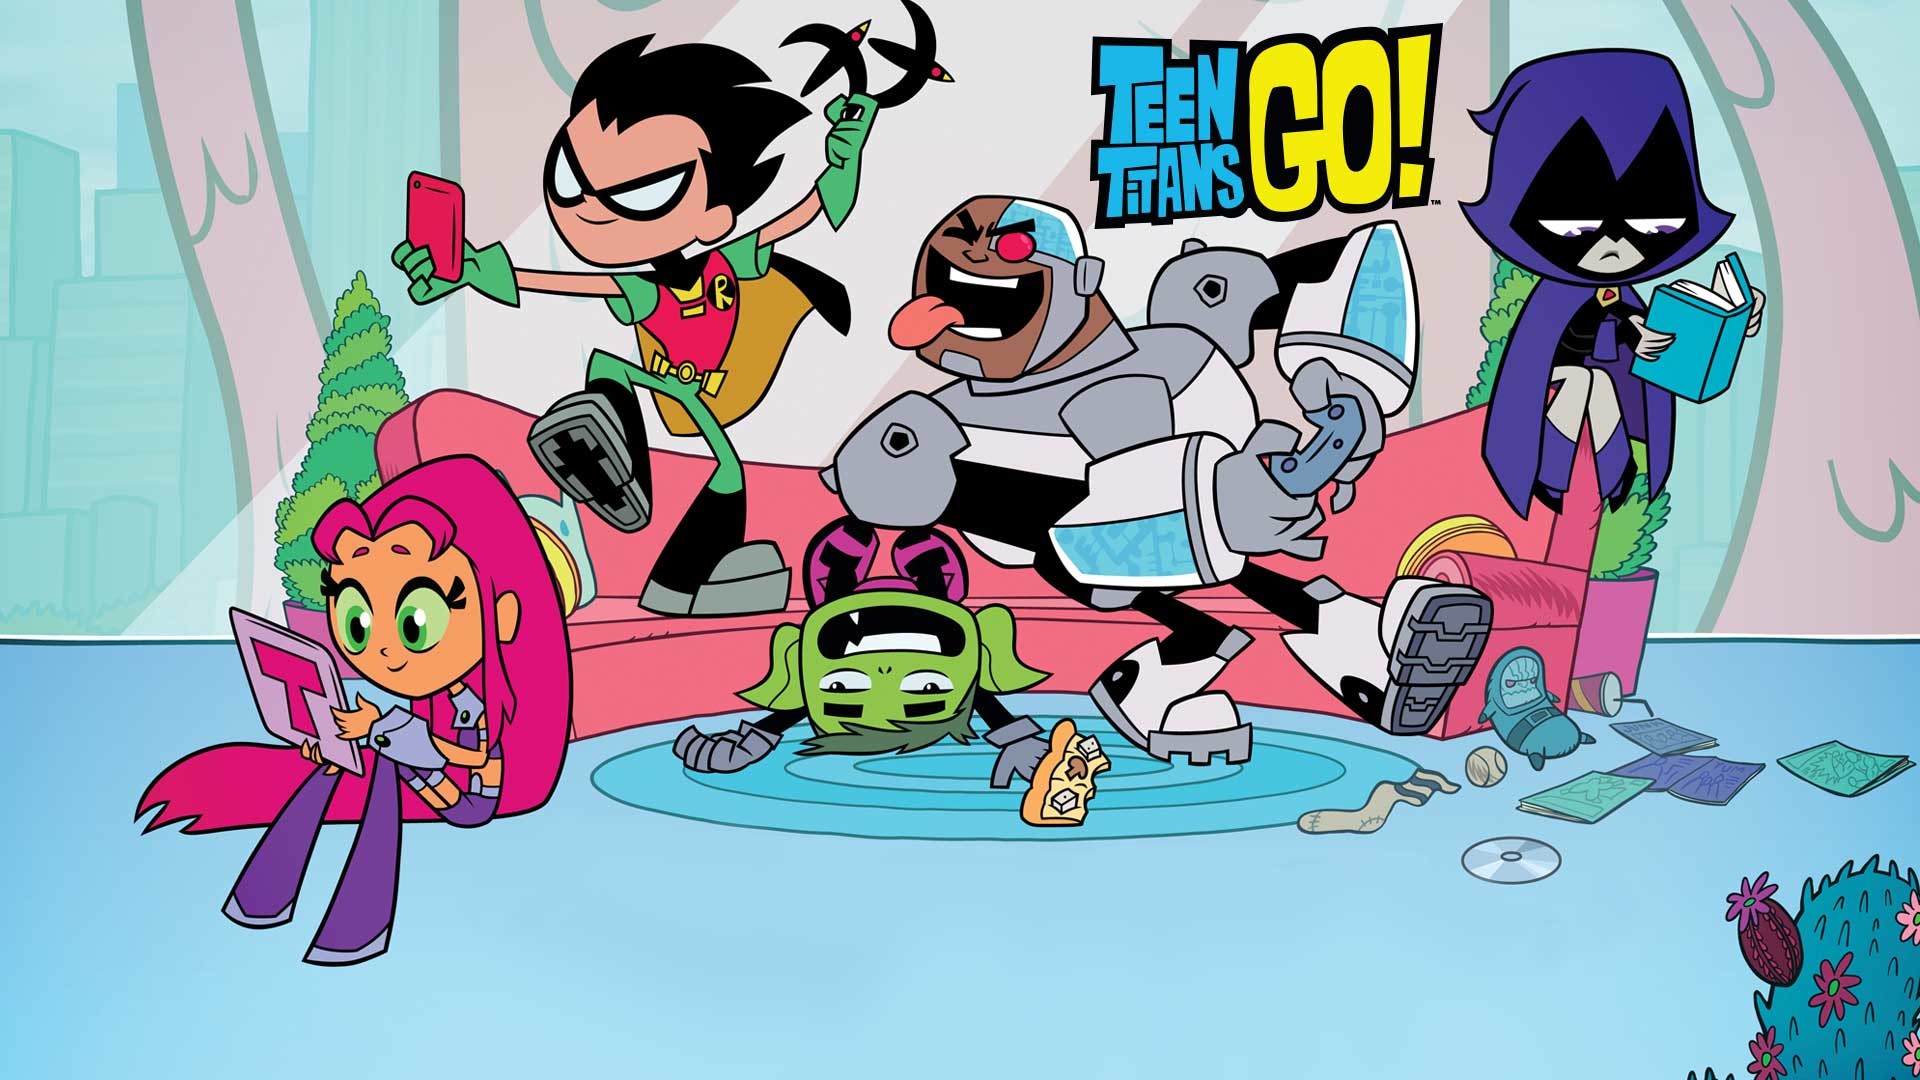 1920x1080 The Teen Titans are ready to go ...